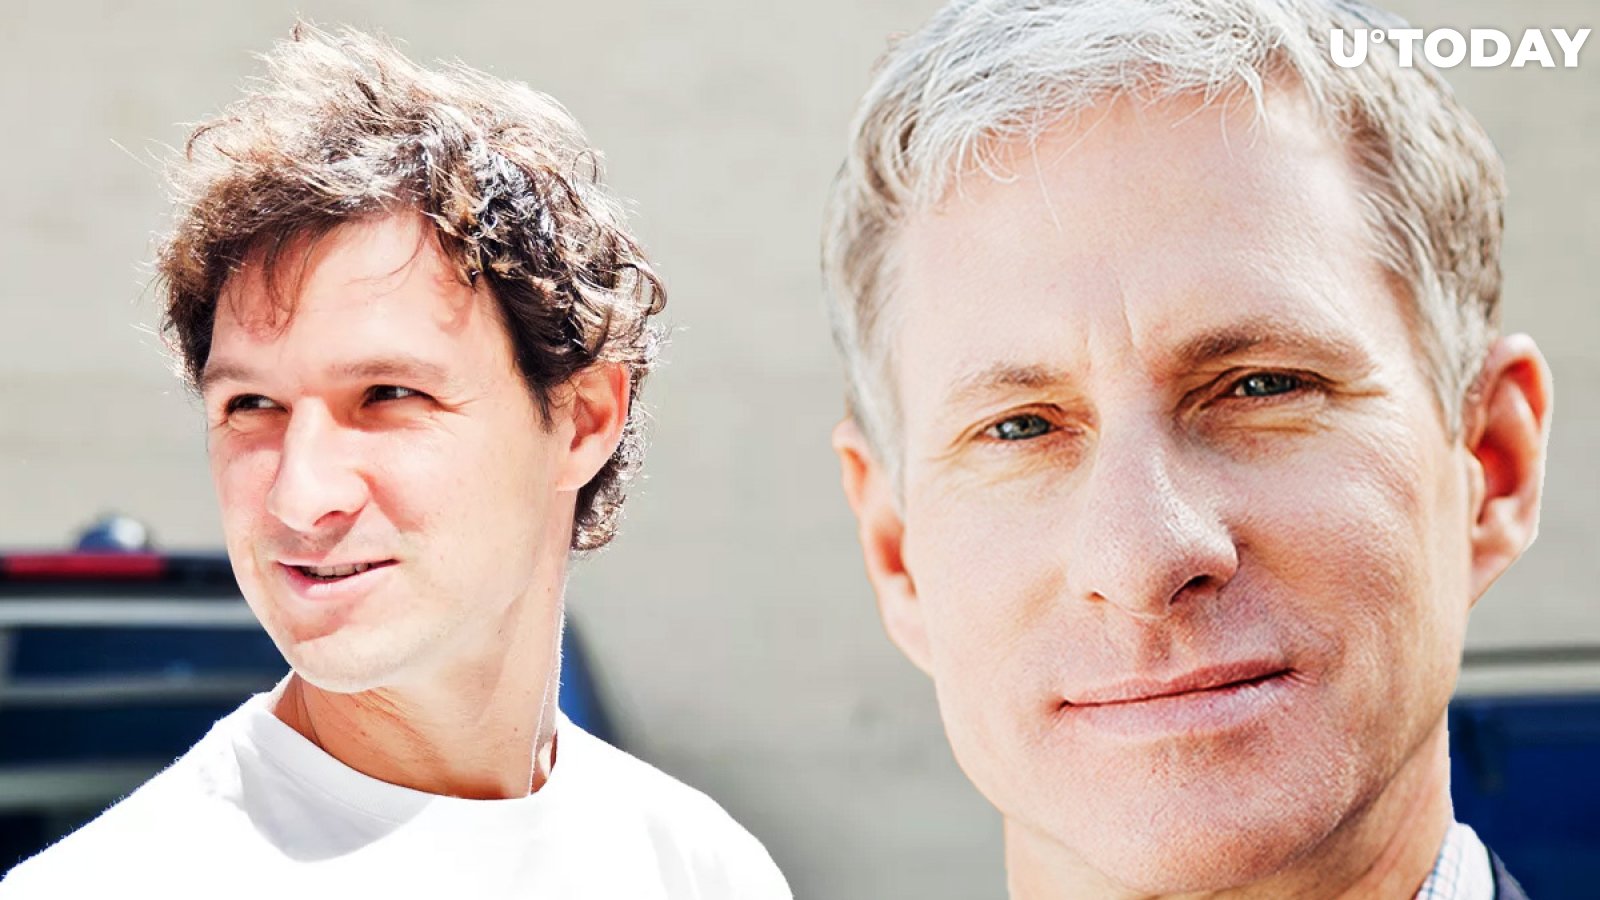 Ripple Co-Founders Chris Larsen and Jed McCaleb Lose 19% and 27% of Their XRP Fortunes